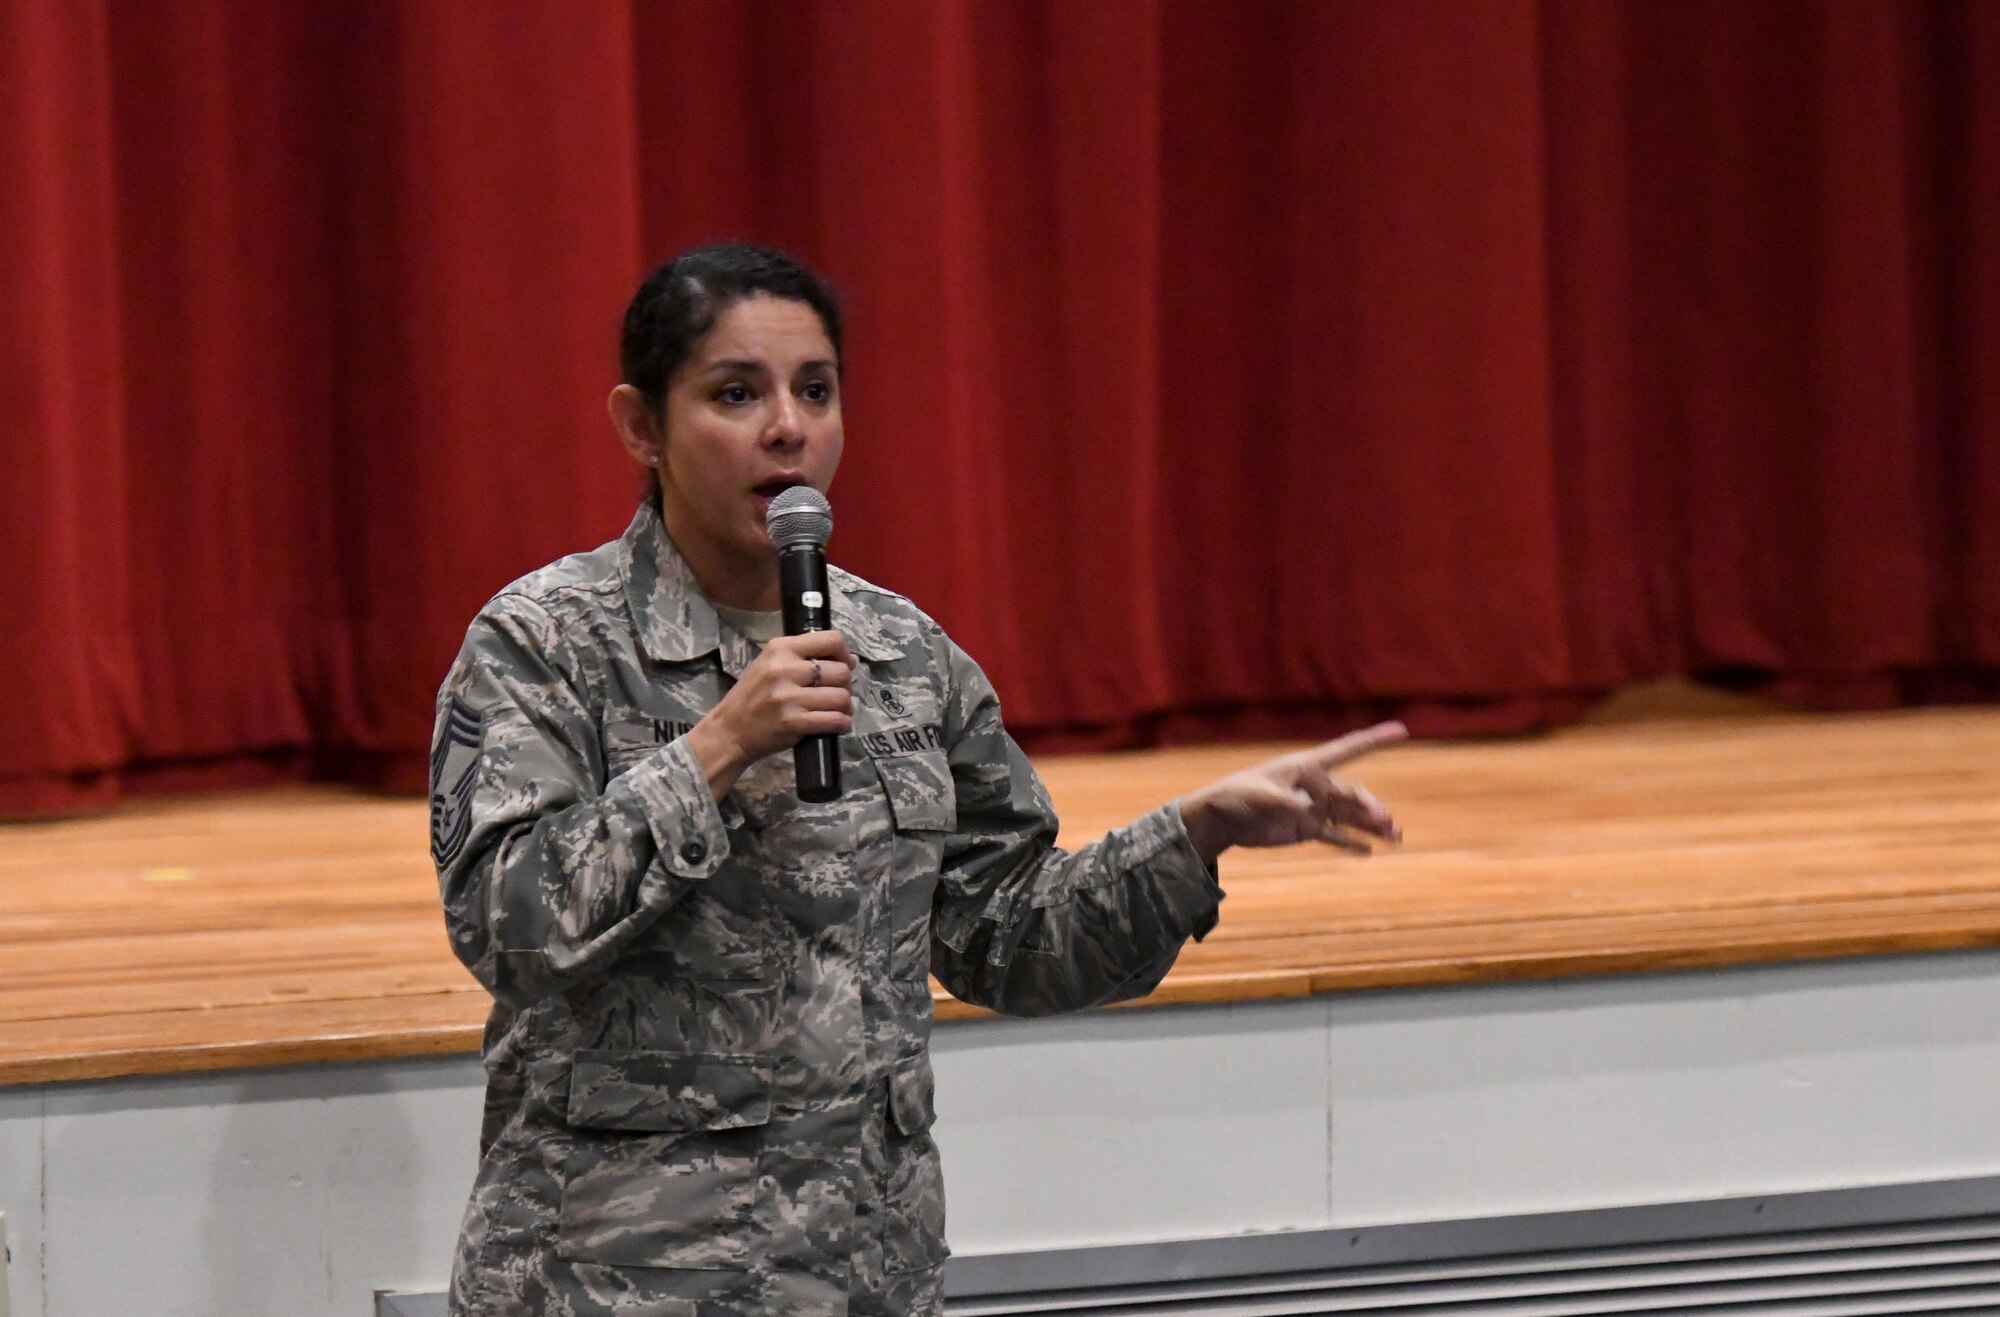 U.S. Air Force Chief Master Sgt. Sandra Nunes, 81st Medical Operations Squadron superintendent, speaks during a 'Profiles in Courage' story-telling event at the Welch Theater at Keesler Air Force Base, Mississippi, Sept. 20, 2018. In recognition of suicide prevention and awareness month, military members shared their stories of bravery, strength and overcoming adversity with Keesler personnel. (U.S. Air Force photo by Kemberly Groue)